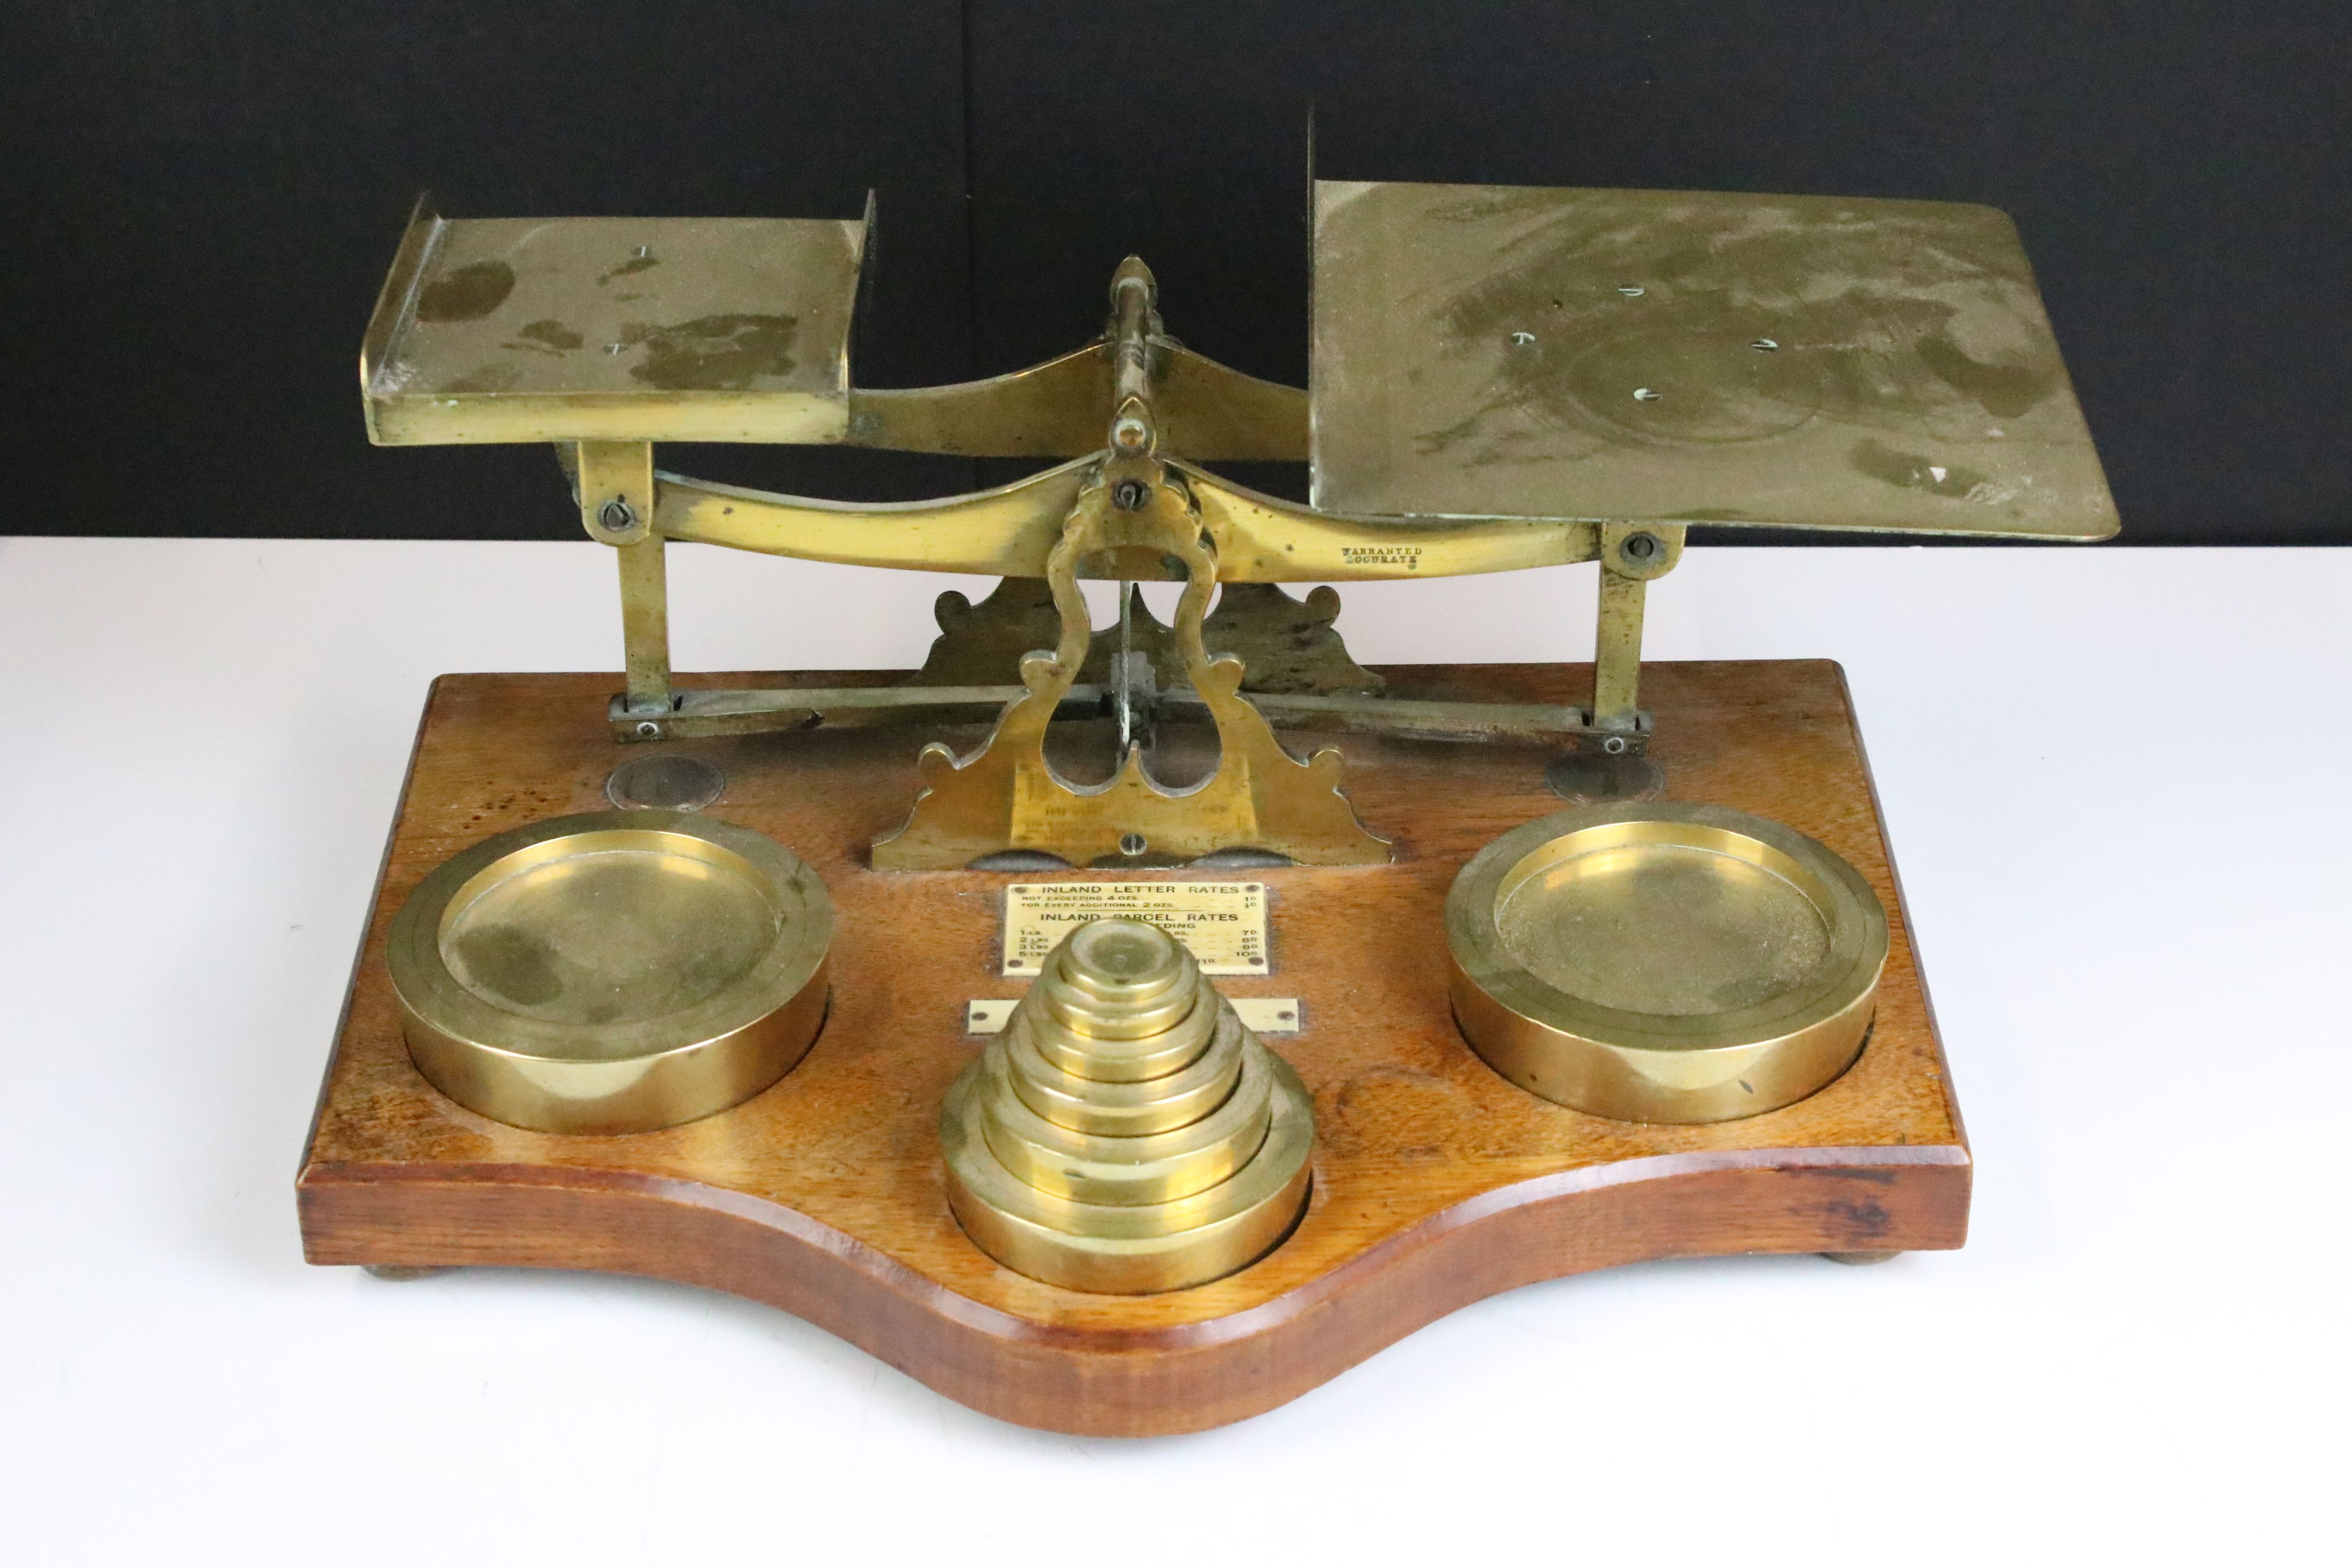 Set of brass inland postal scales, complete with weights (ranging from 1oz to 4lb), with ivorine